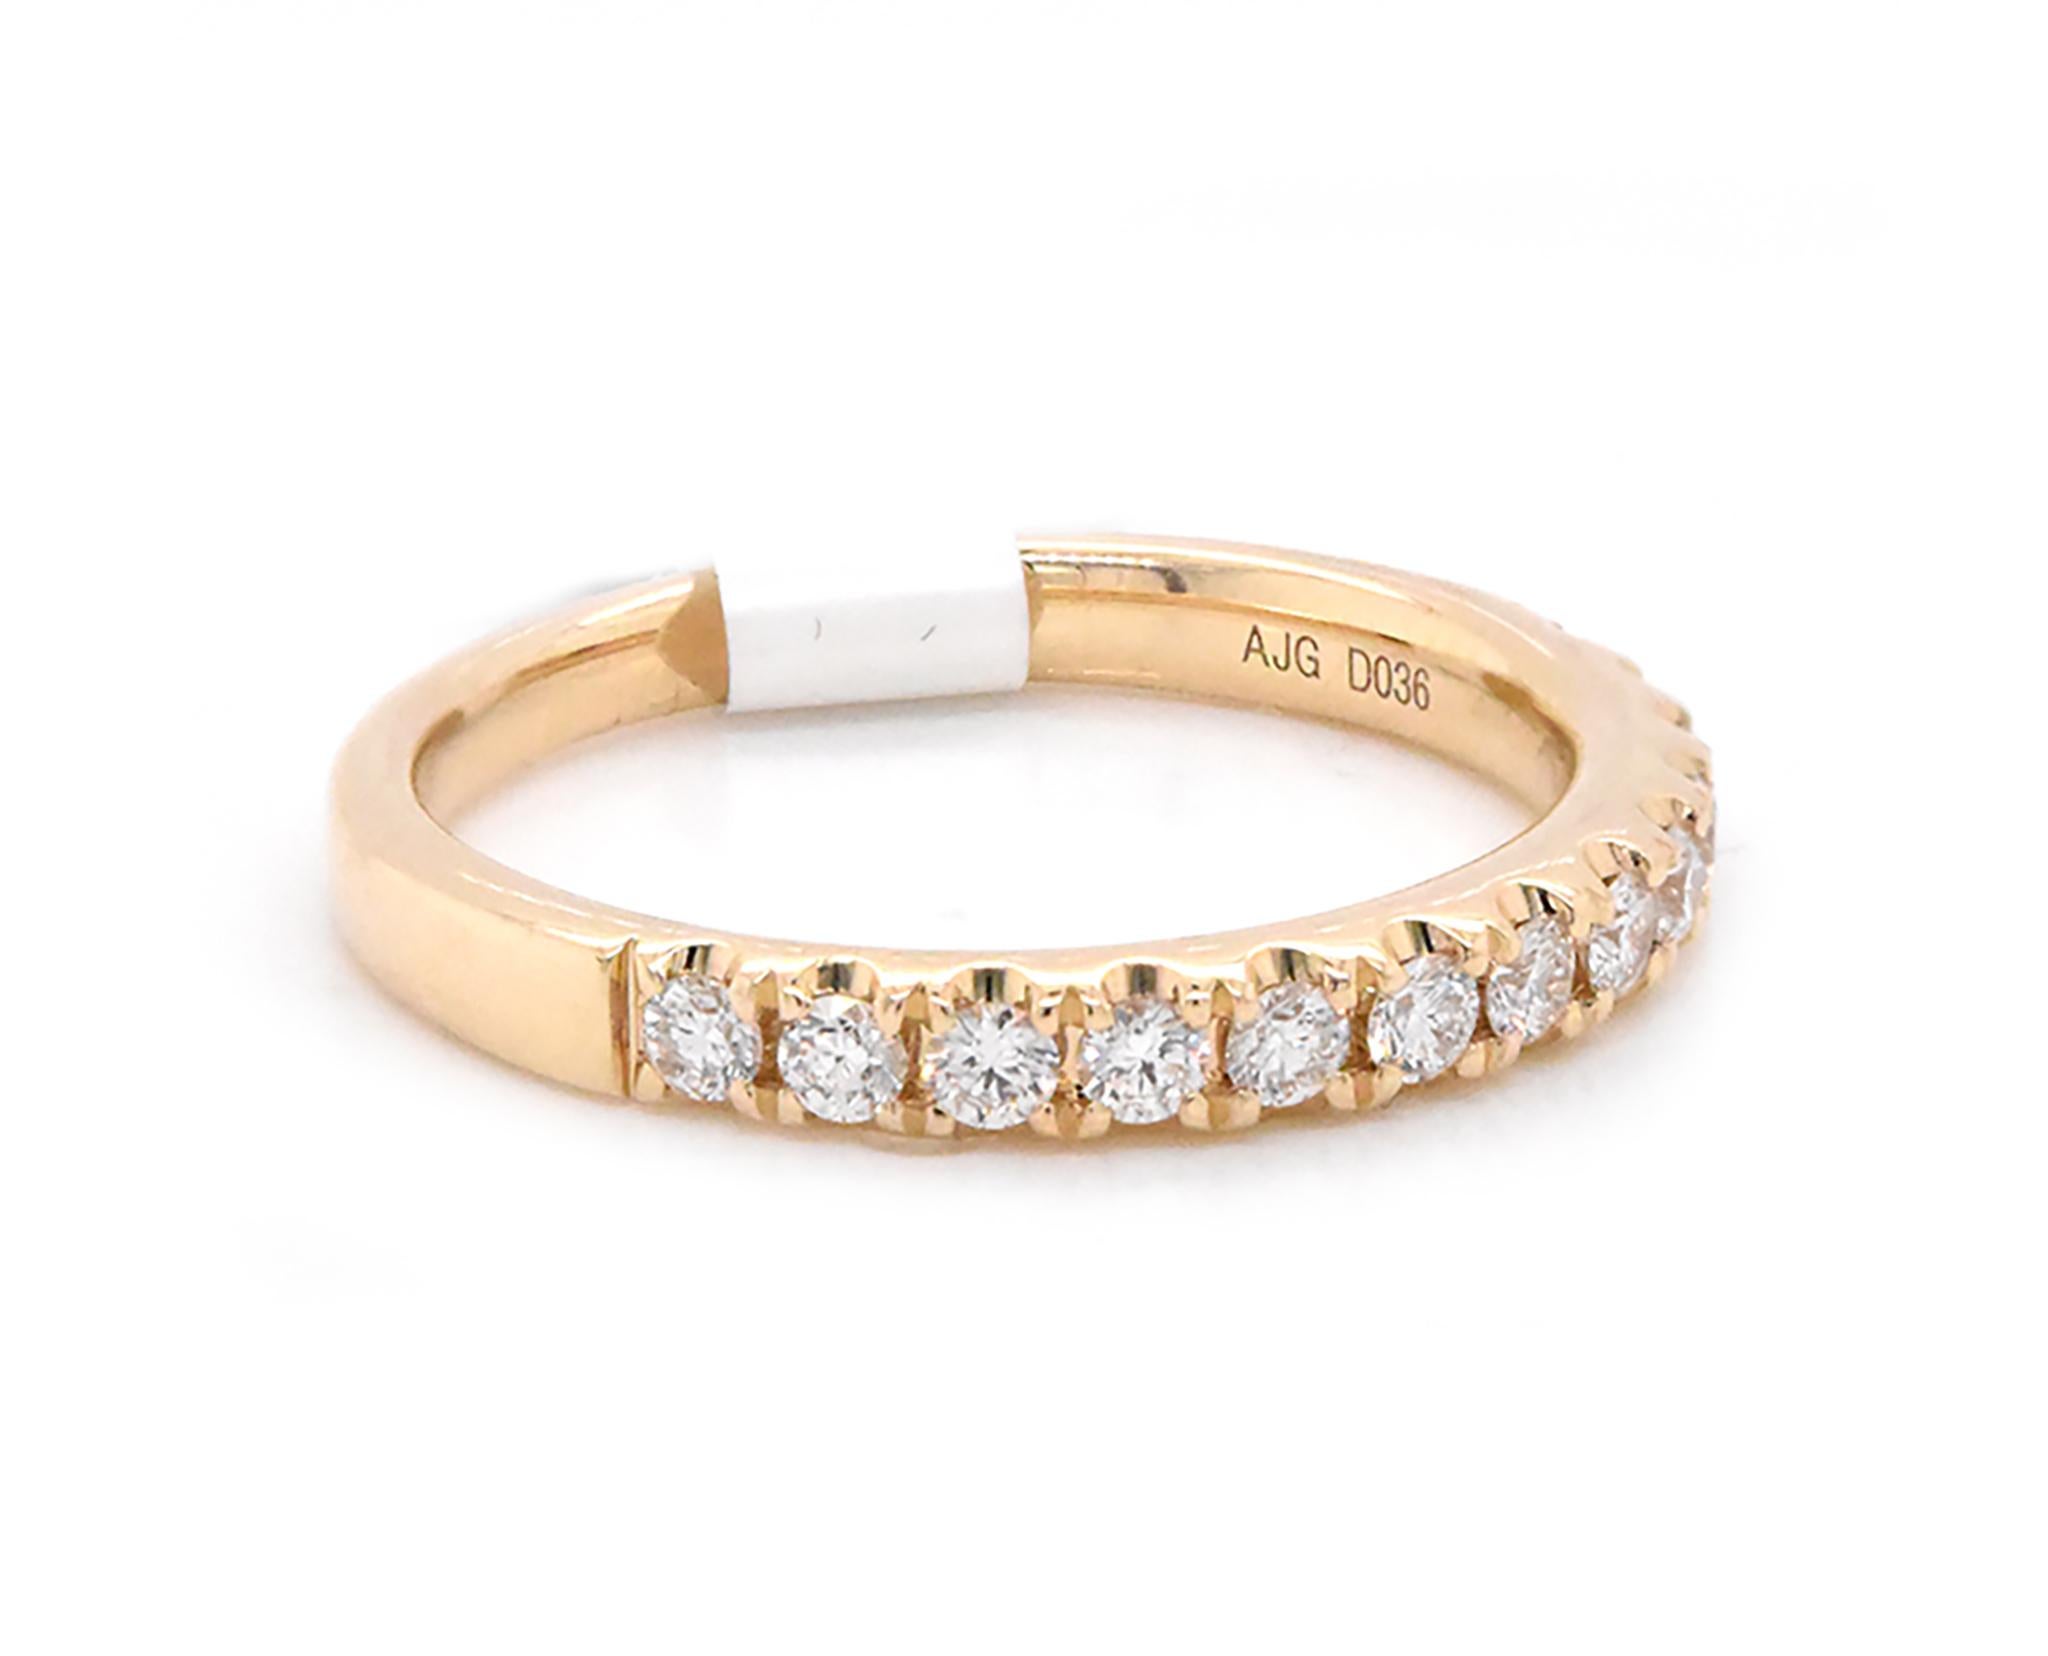 Designer: custom
Material: 14k yellow gold
Diamonds: 13 round cut = .36cttw
Color: G
Clarity: VS
Size: 7 (please allow two additional shipping days for sizing requests)  
Dimensions: ring measures 3mm in width
Weight: 2.91 grams
